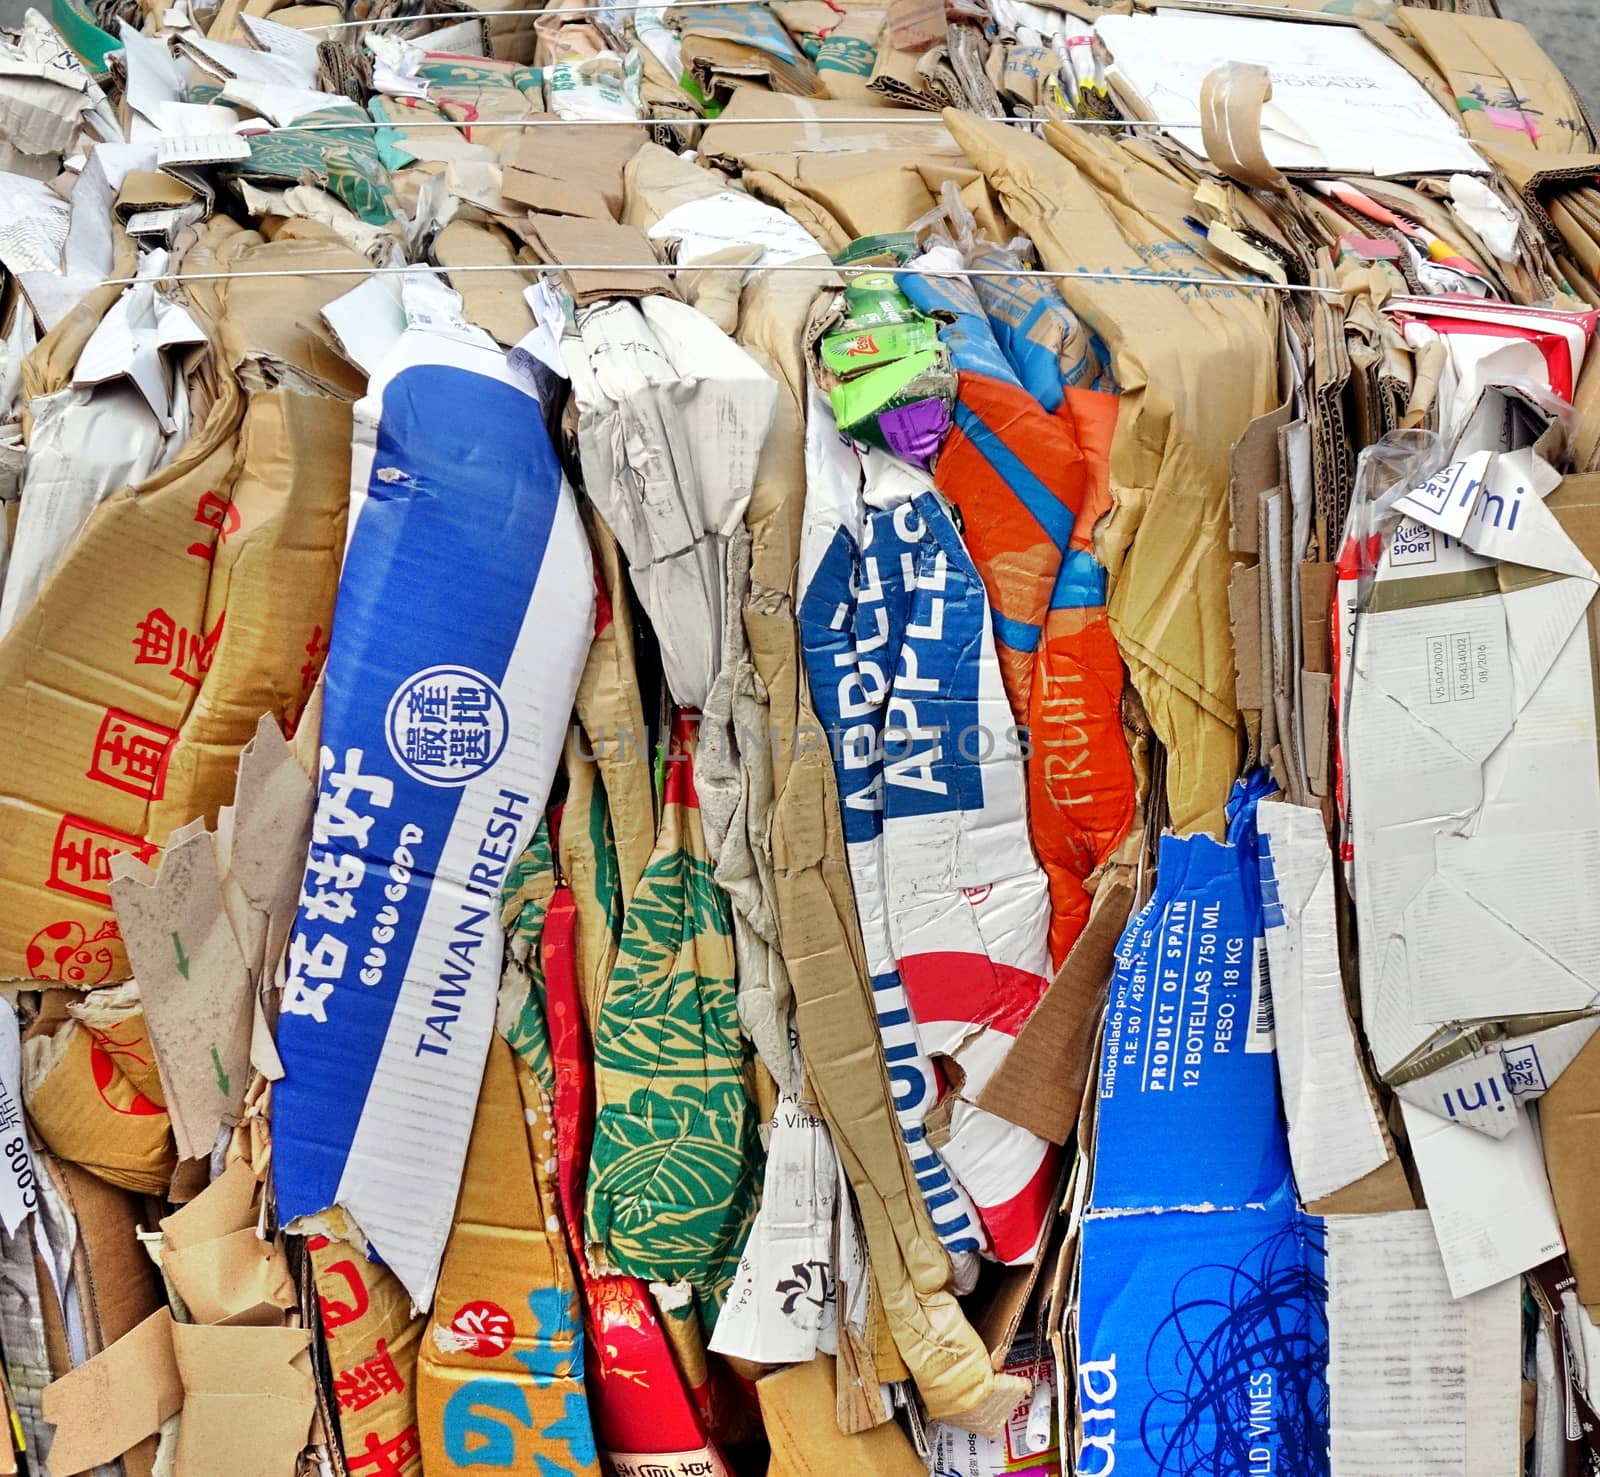 KAOHSIUNG, TAIWAN -- NOVEMBER 5, 2017: Paper, cardboard boxes and packaging has been compacted and tied up in preparation for recycling.